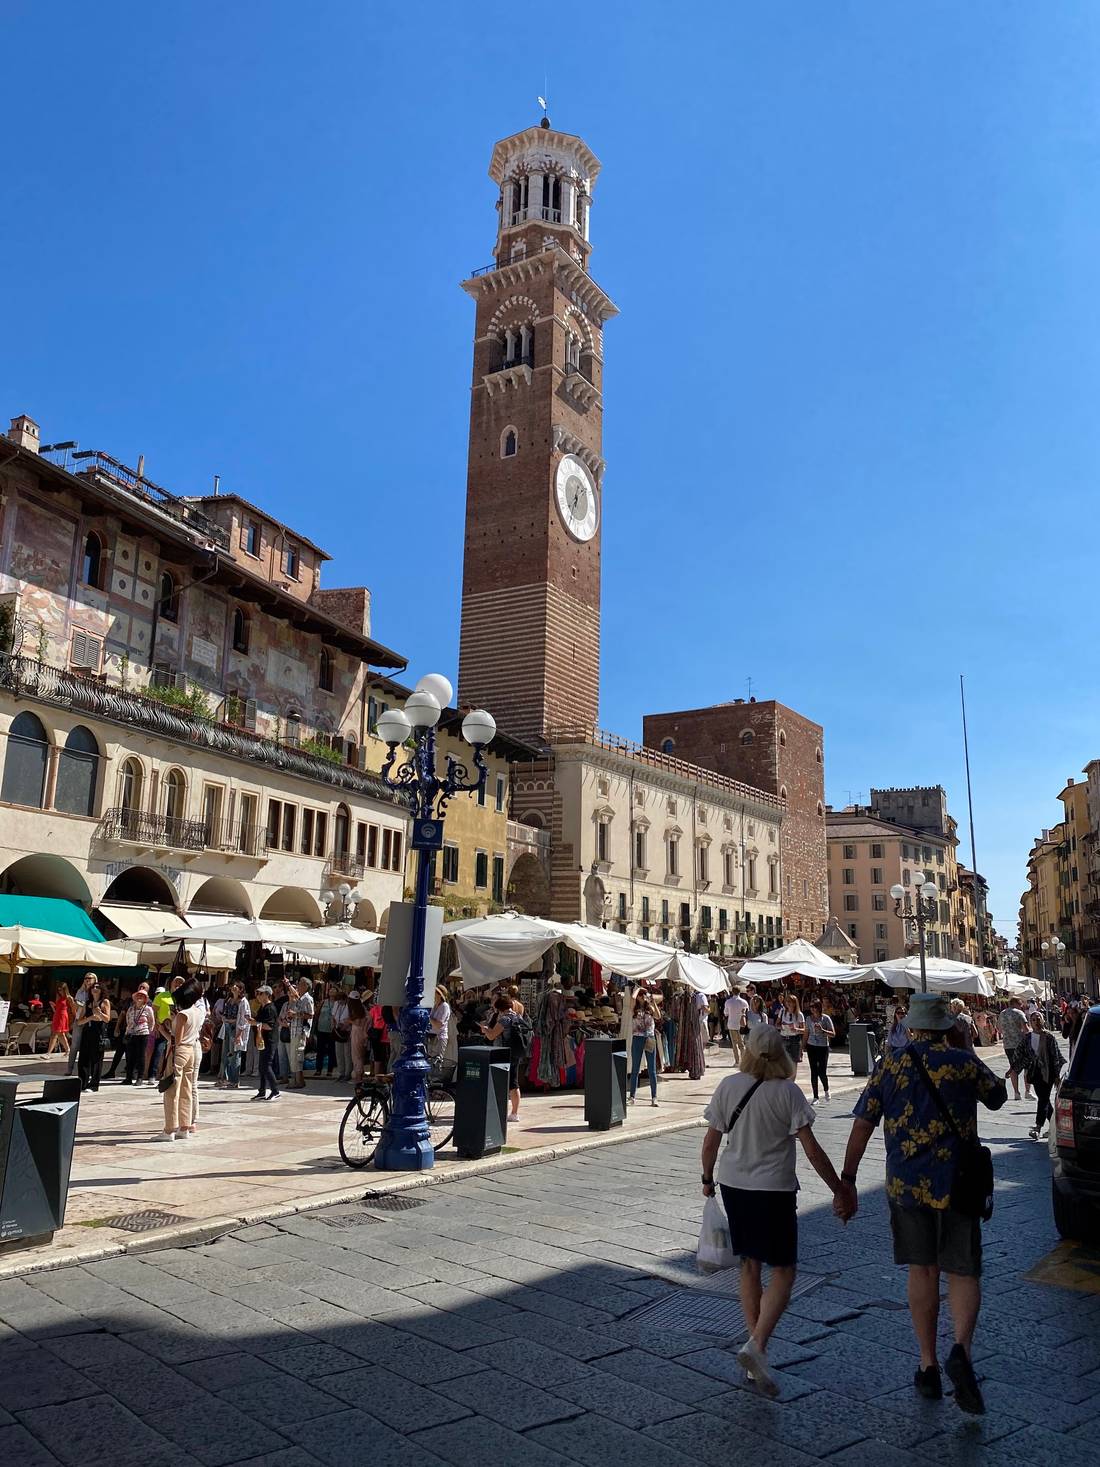 Verona’s tallest Medieval tower built in 1172 offering panoramic views